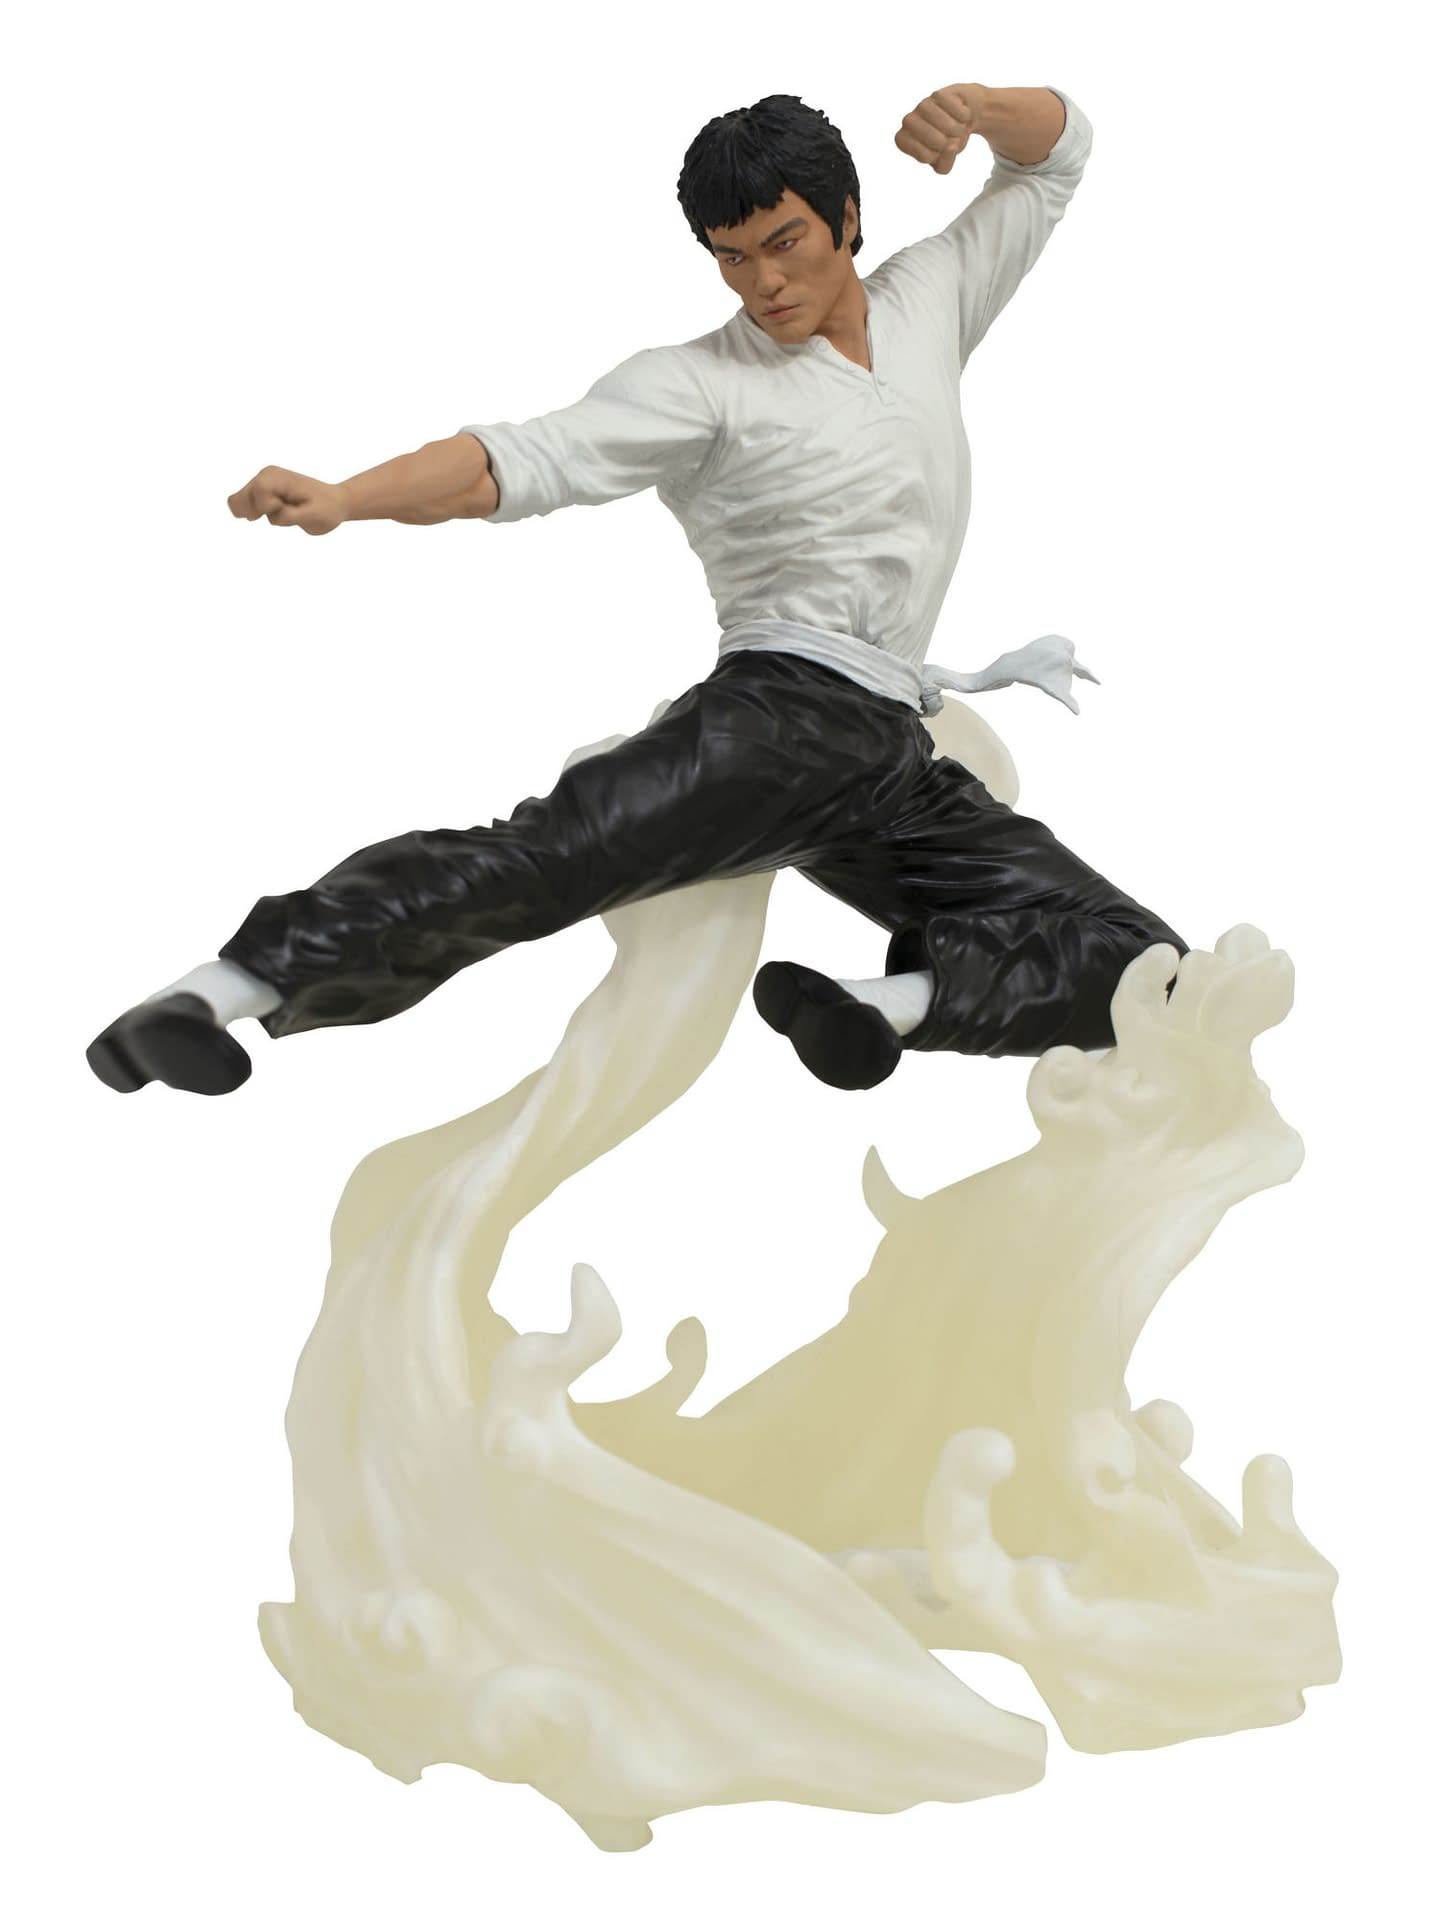 Transformers and Bruce Lee Statues Debut from Diamond Select Toys 